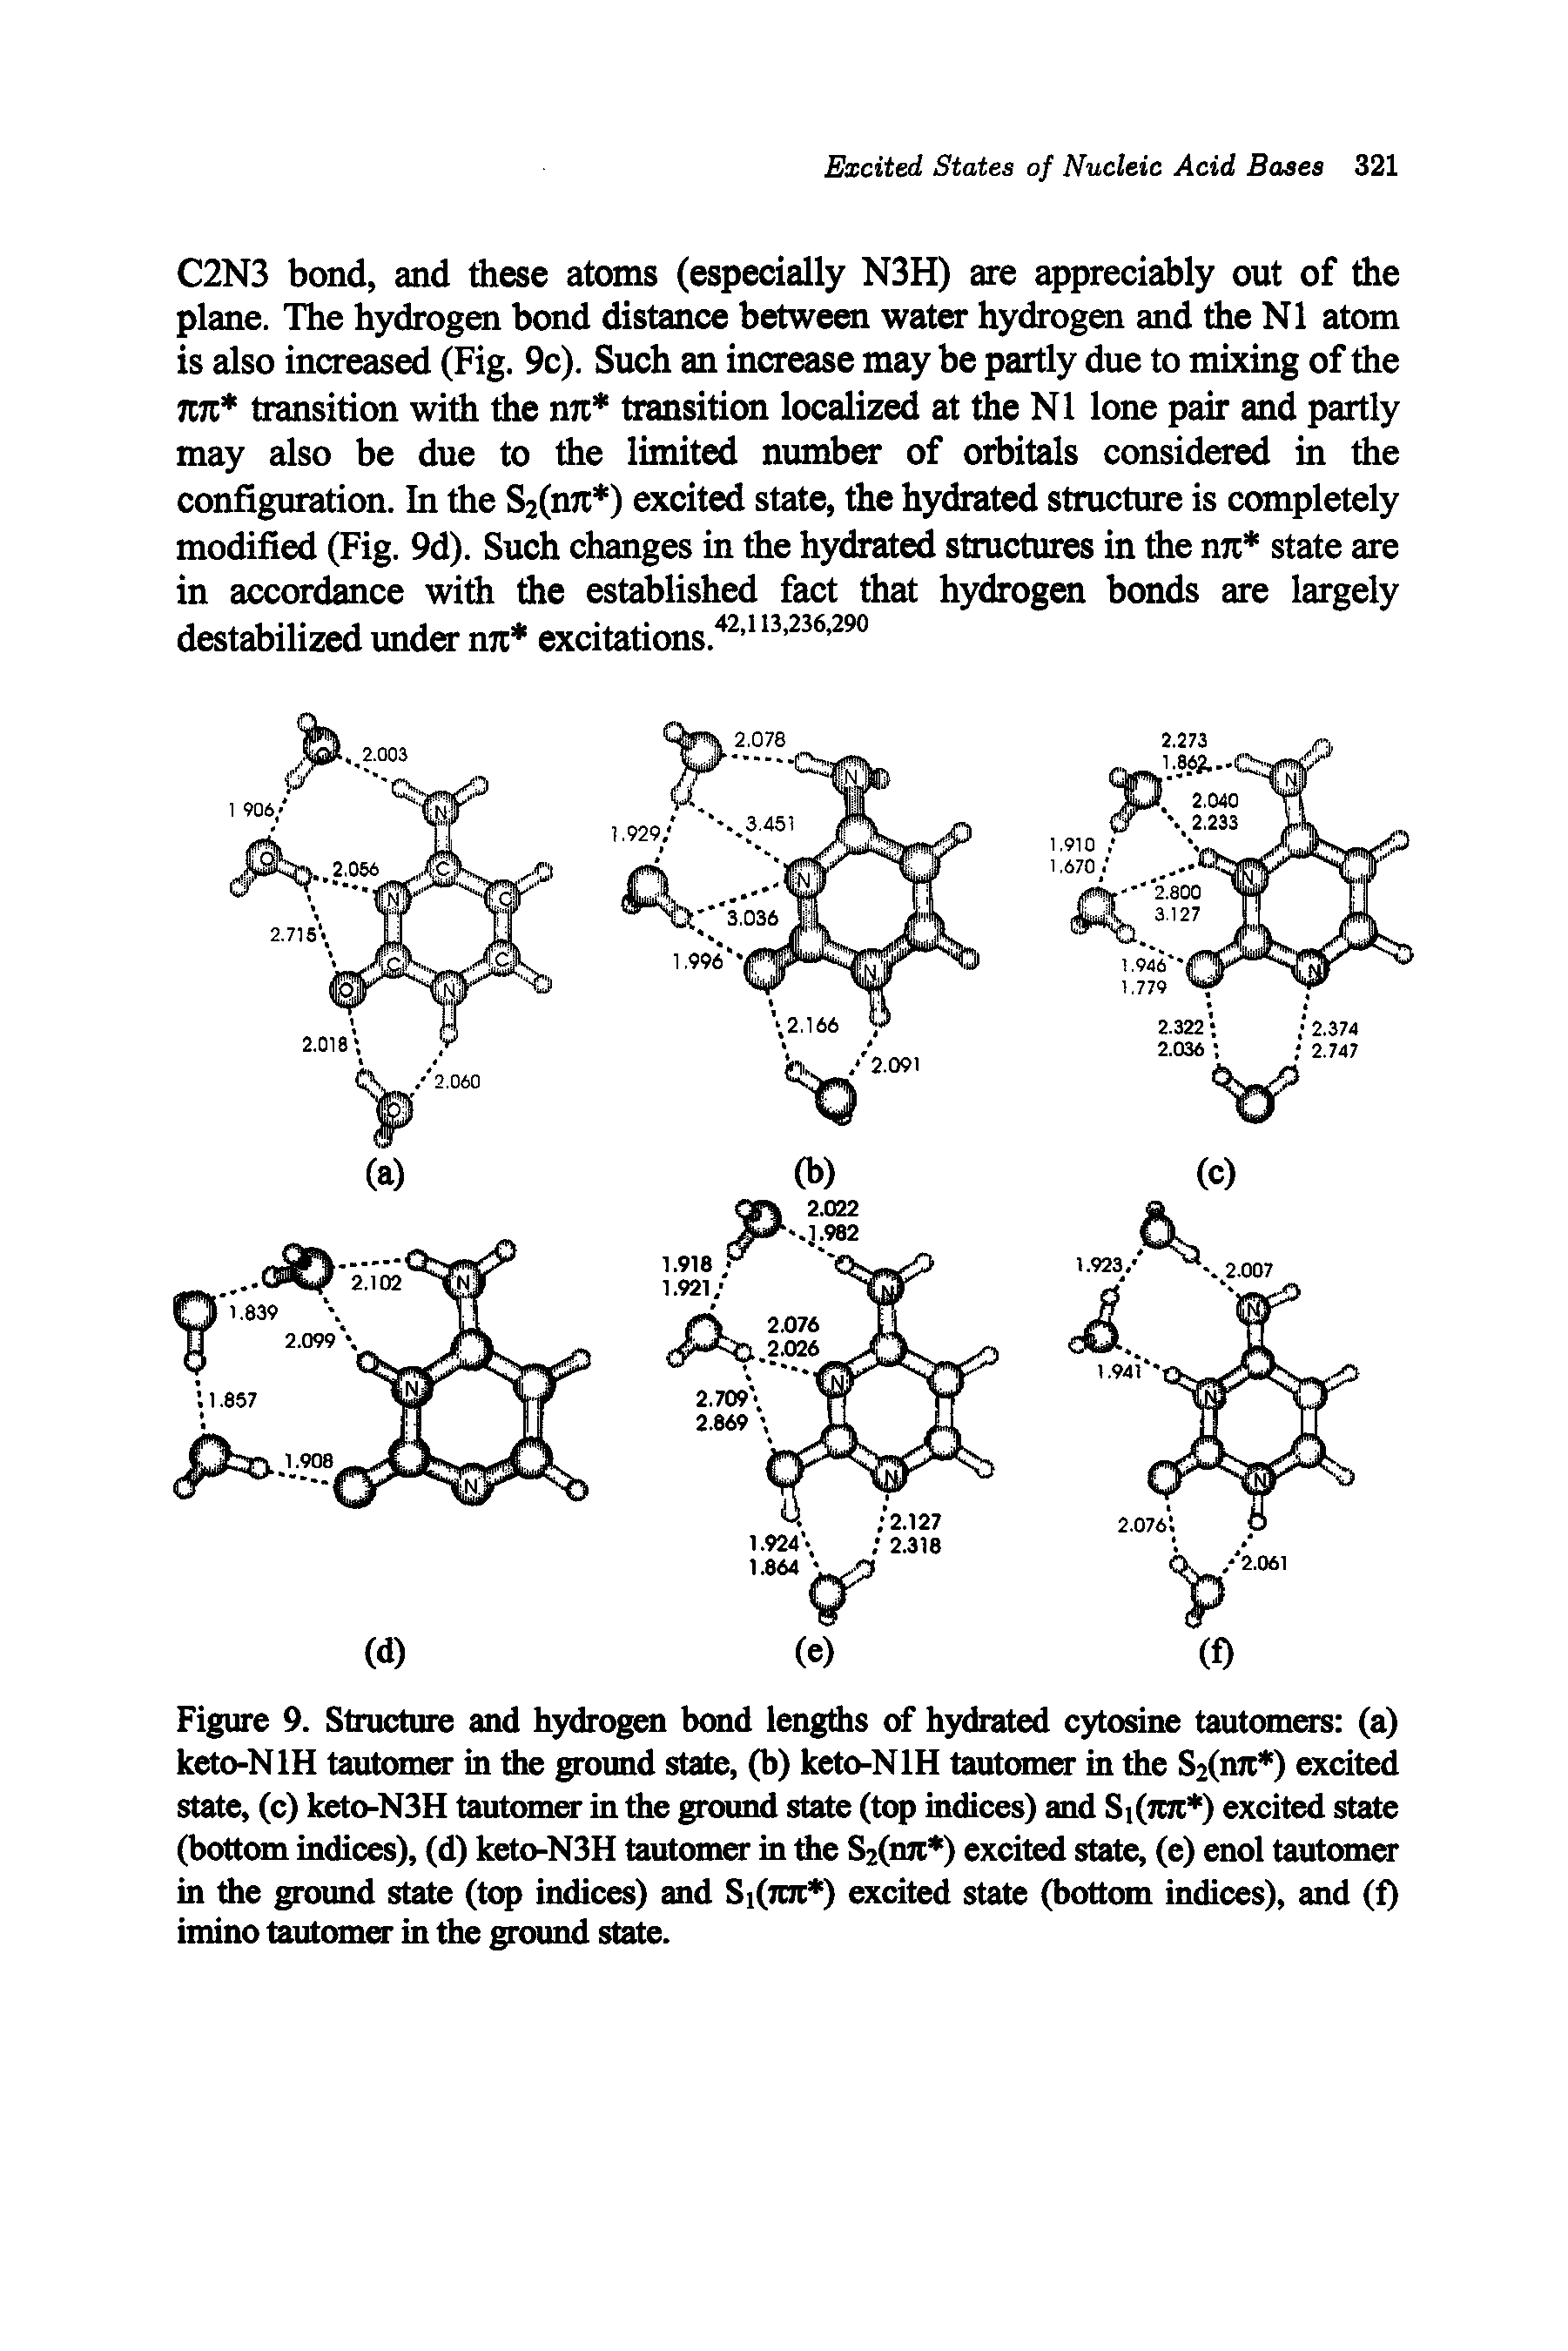 Figure 9. Structure and hydrogen bond lengths of hydrated cytosine tautomers (a) keto-NlH tautomer in the ground state, (b) keto-NlH tautomer in the S2(njt ) excited state, (c) keto-N3H tautomer in the ground state (top indices) and Sitnn" ) excited state (bottom indices), (d) keto-N3H tautomer in the 82(031 ) excited state, (e) enol tautomer in the groimd state (top indices) and Si(7nc ) excited state (bottom indices), and (f) imino tautomer in the ground state.